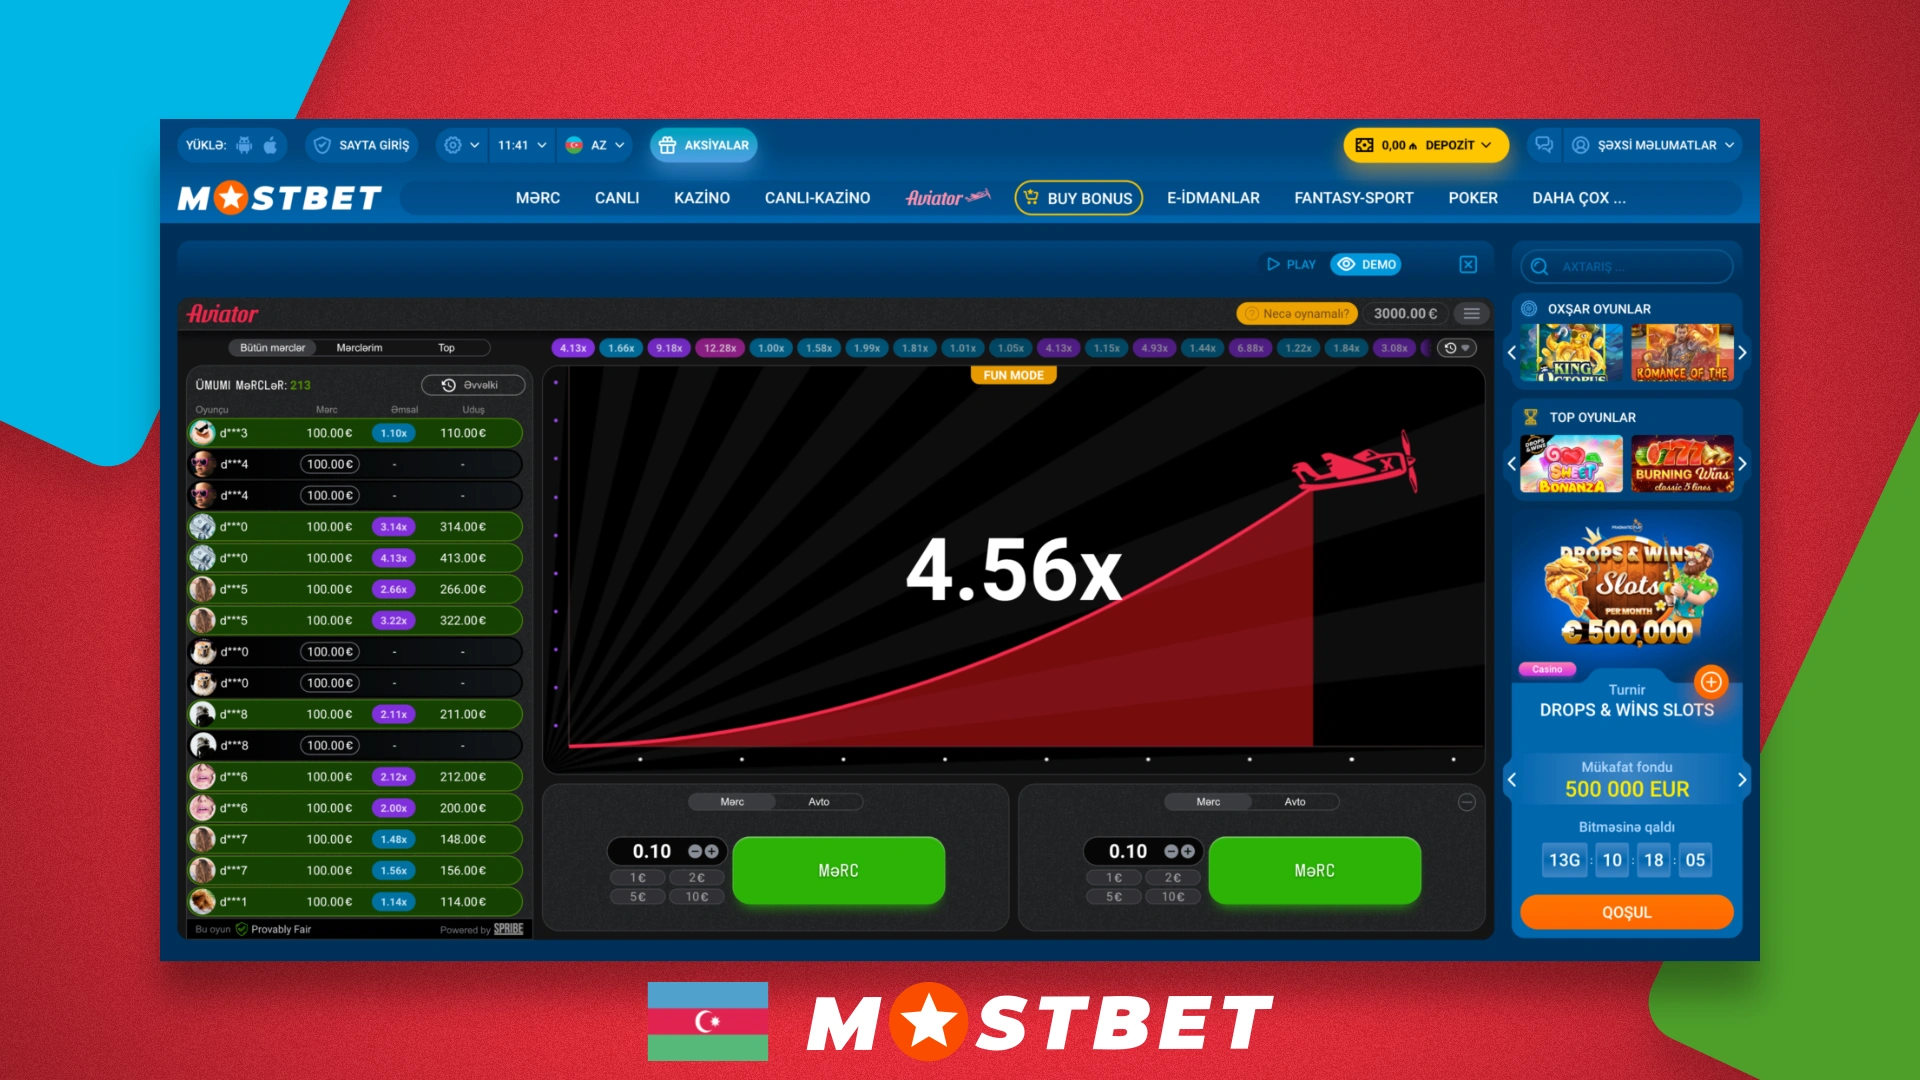 The popular game Aviator is available to Mostbet customers in Azerbaijan